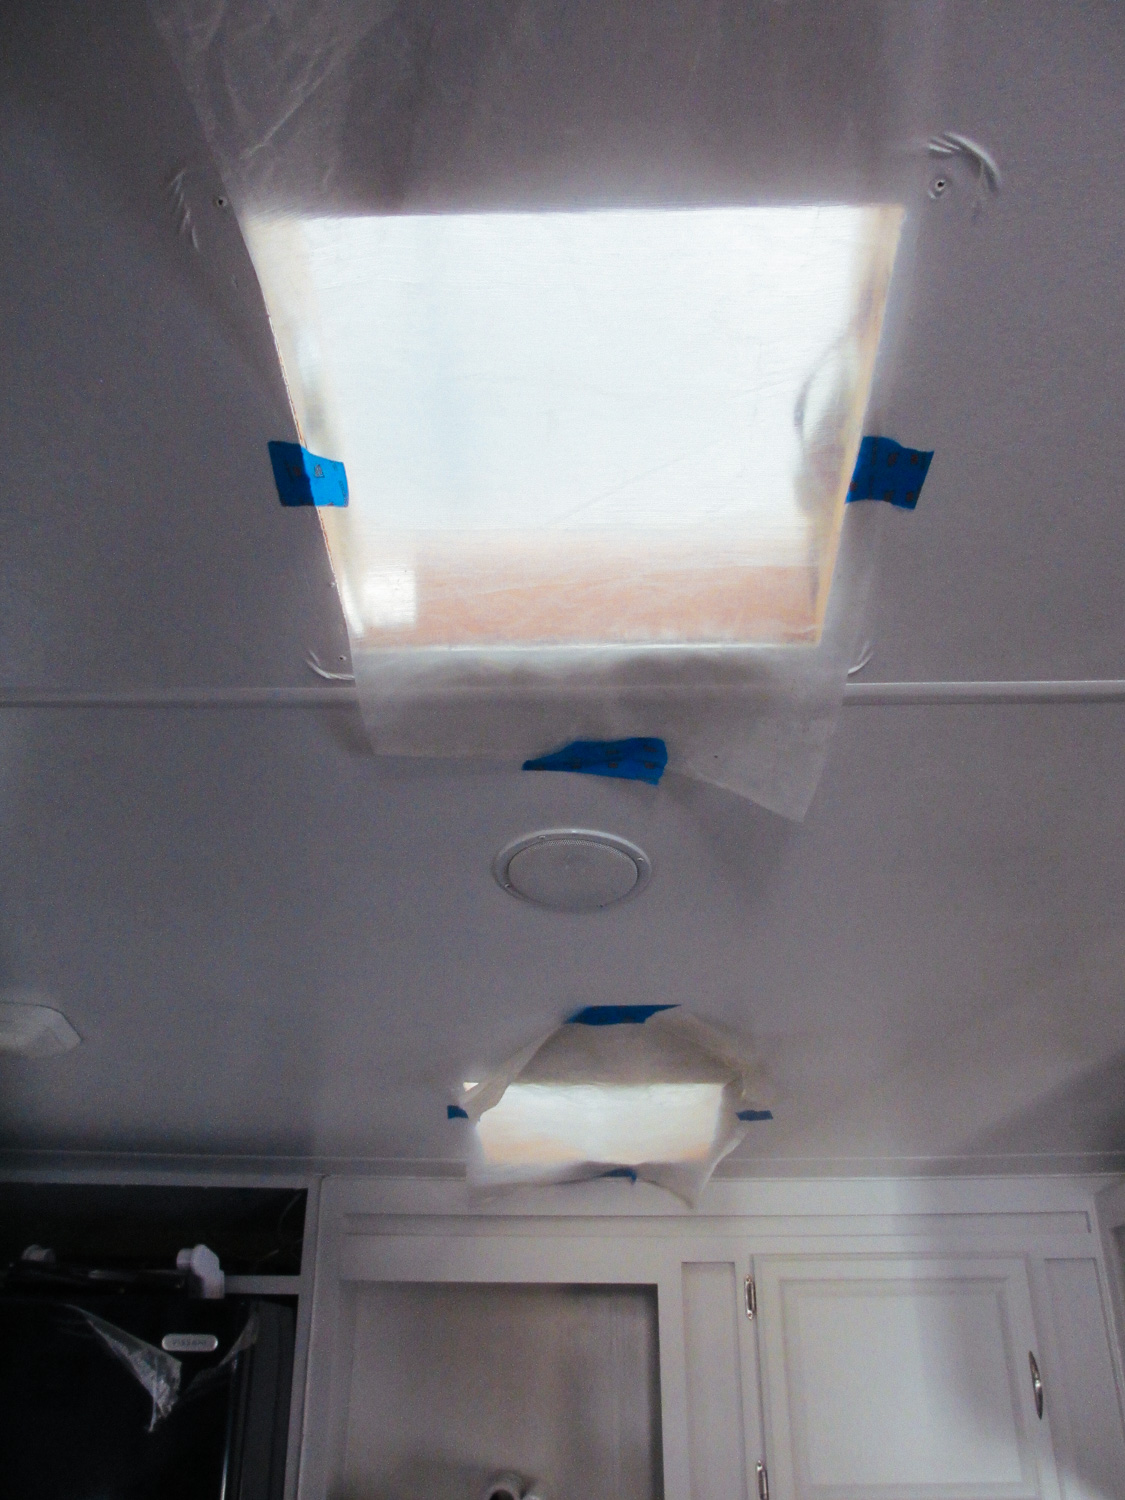  We covered the inside of the vent holes with plastic to prevent roof adhesive dripping into the rig. 